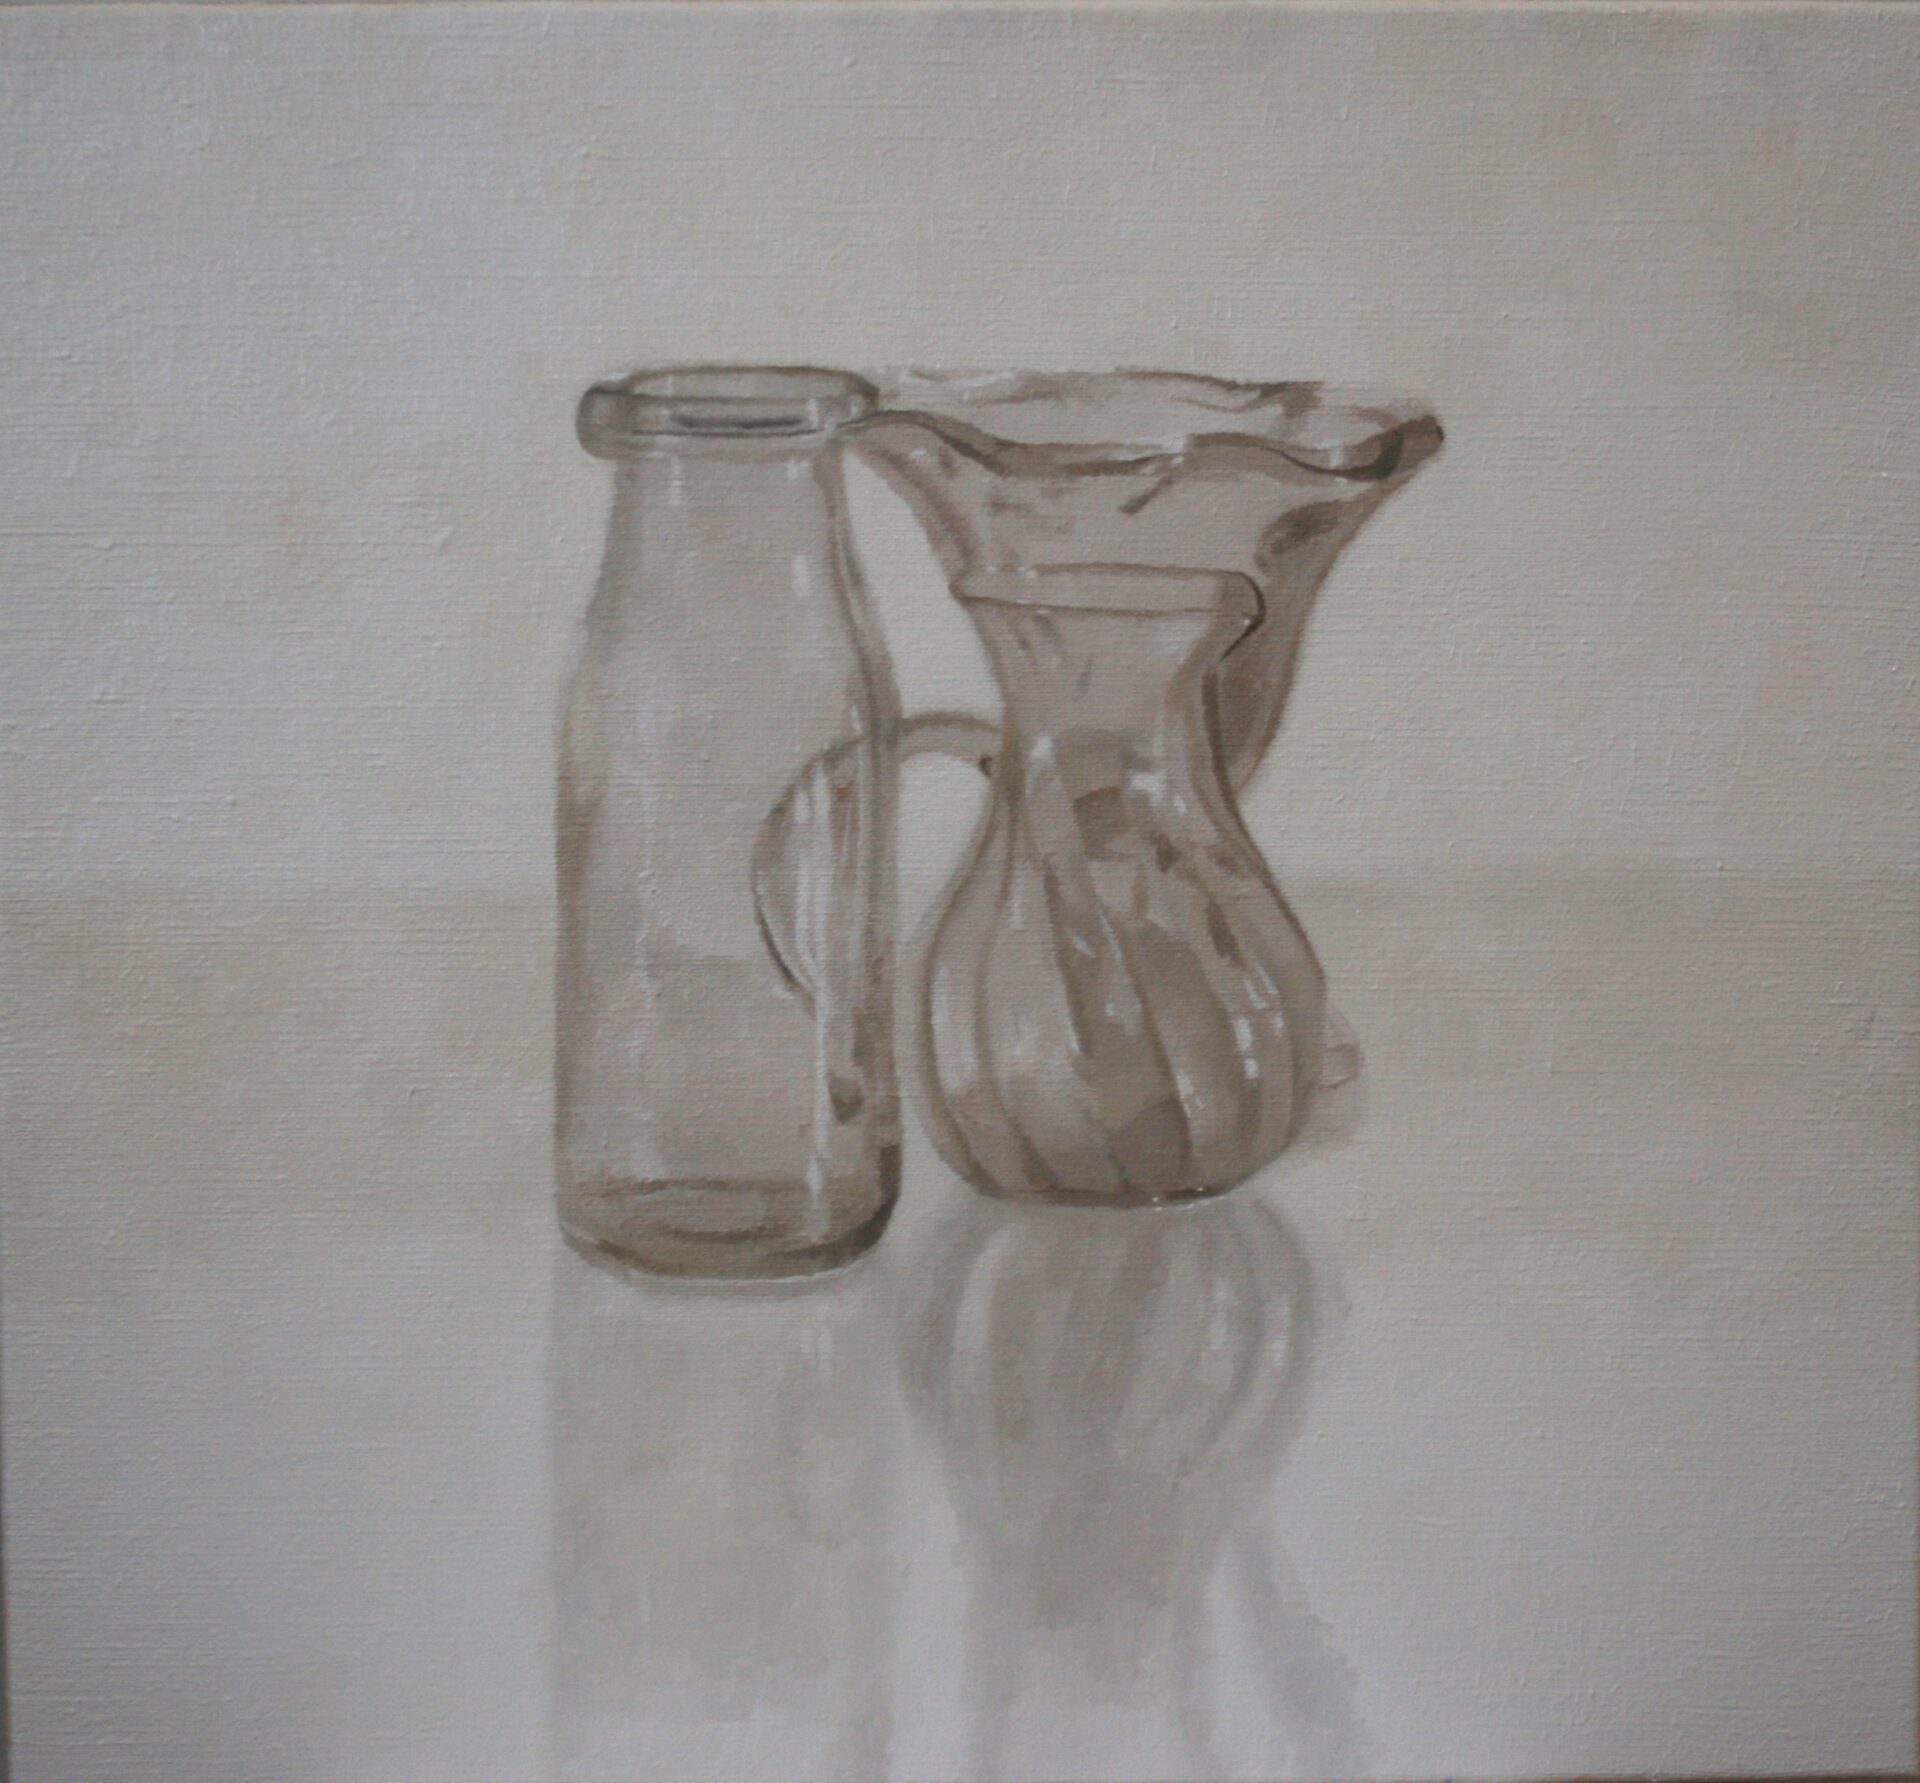 The Glass Vessels